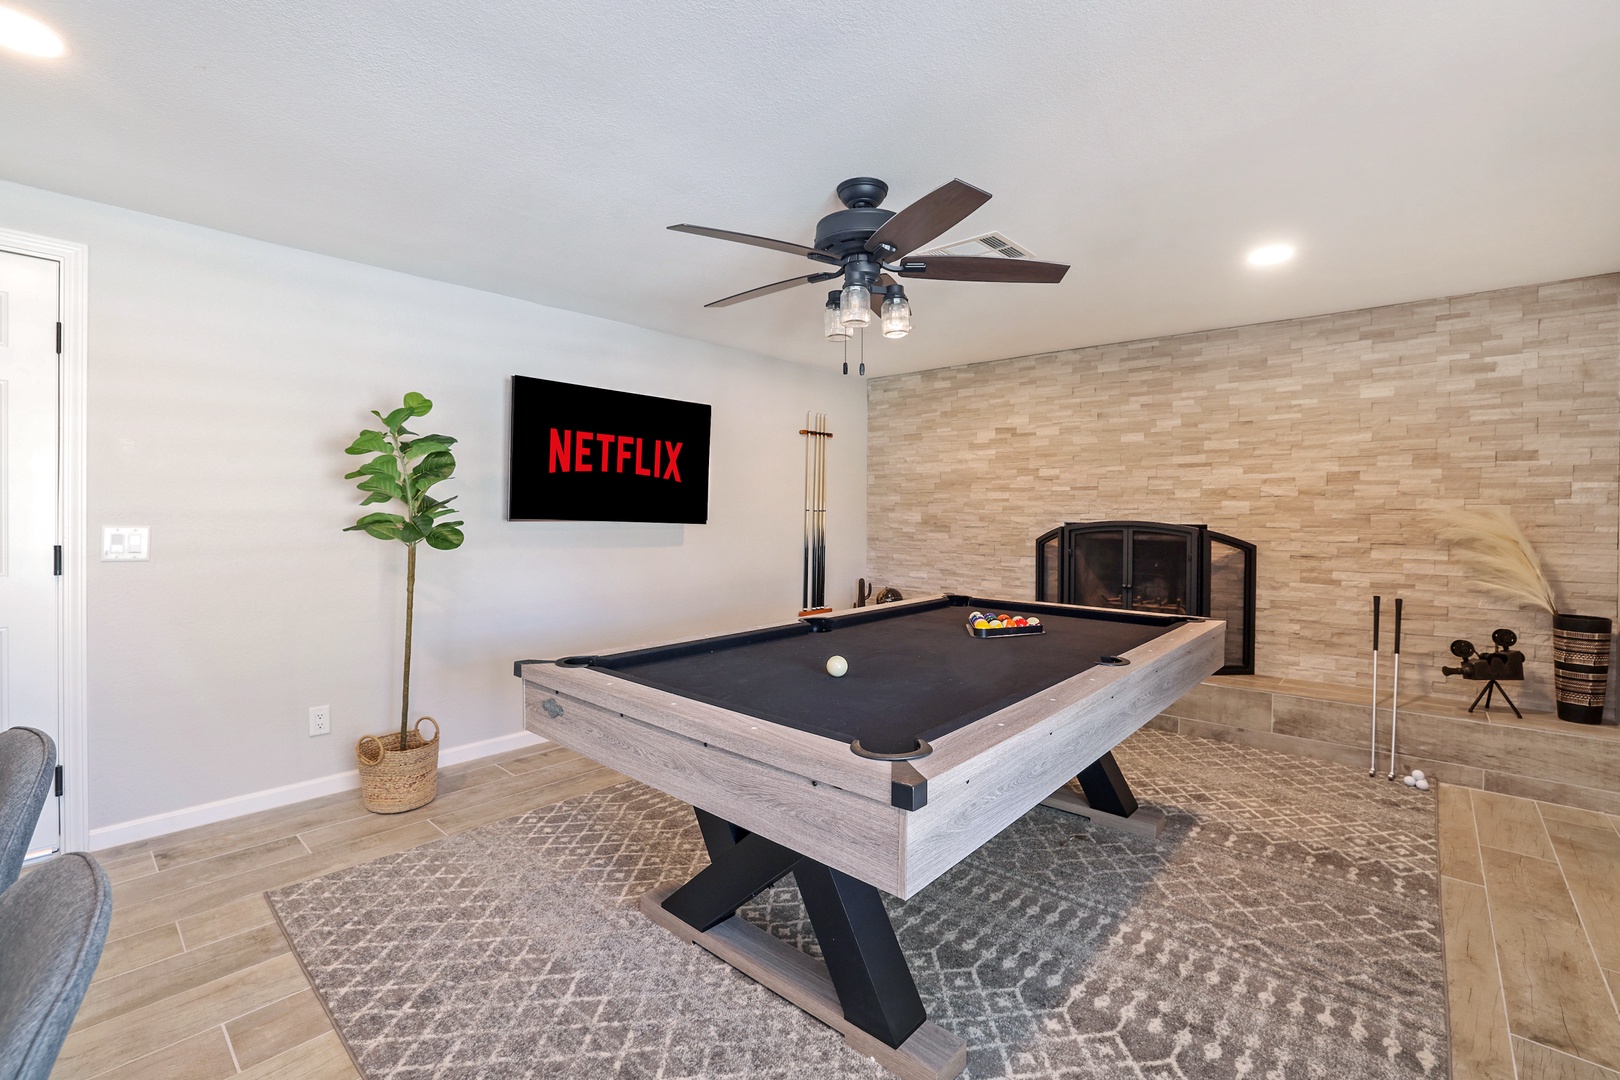 Pool table with a fireplace and smart TV